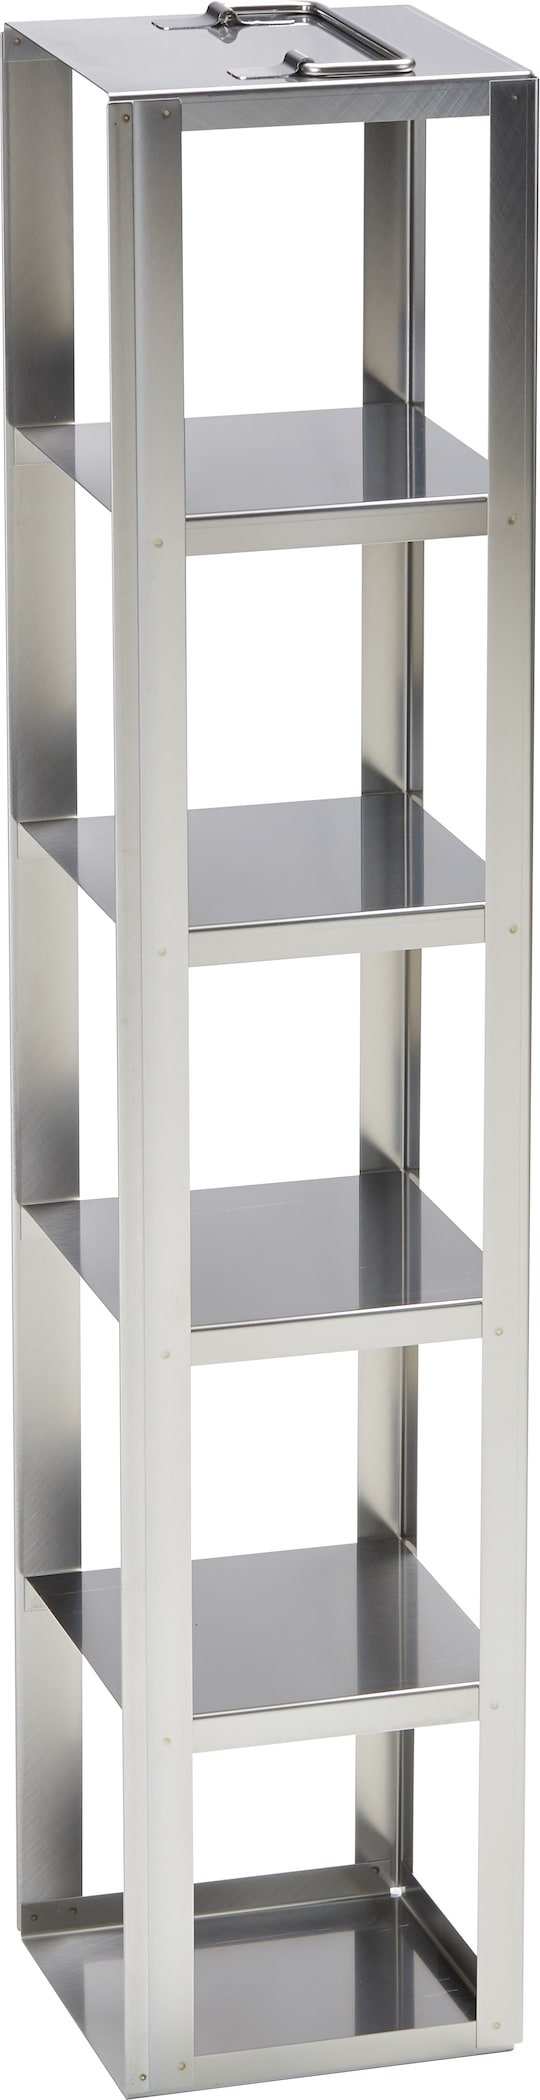 Metal tower rack for (5.0 in/ 127 mm) storage boxes in Eppendorf ULT chest freezer - (6001000510)